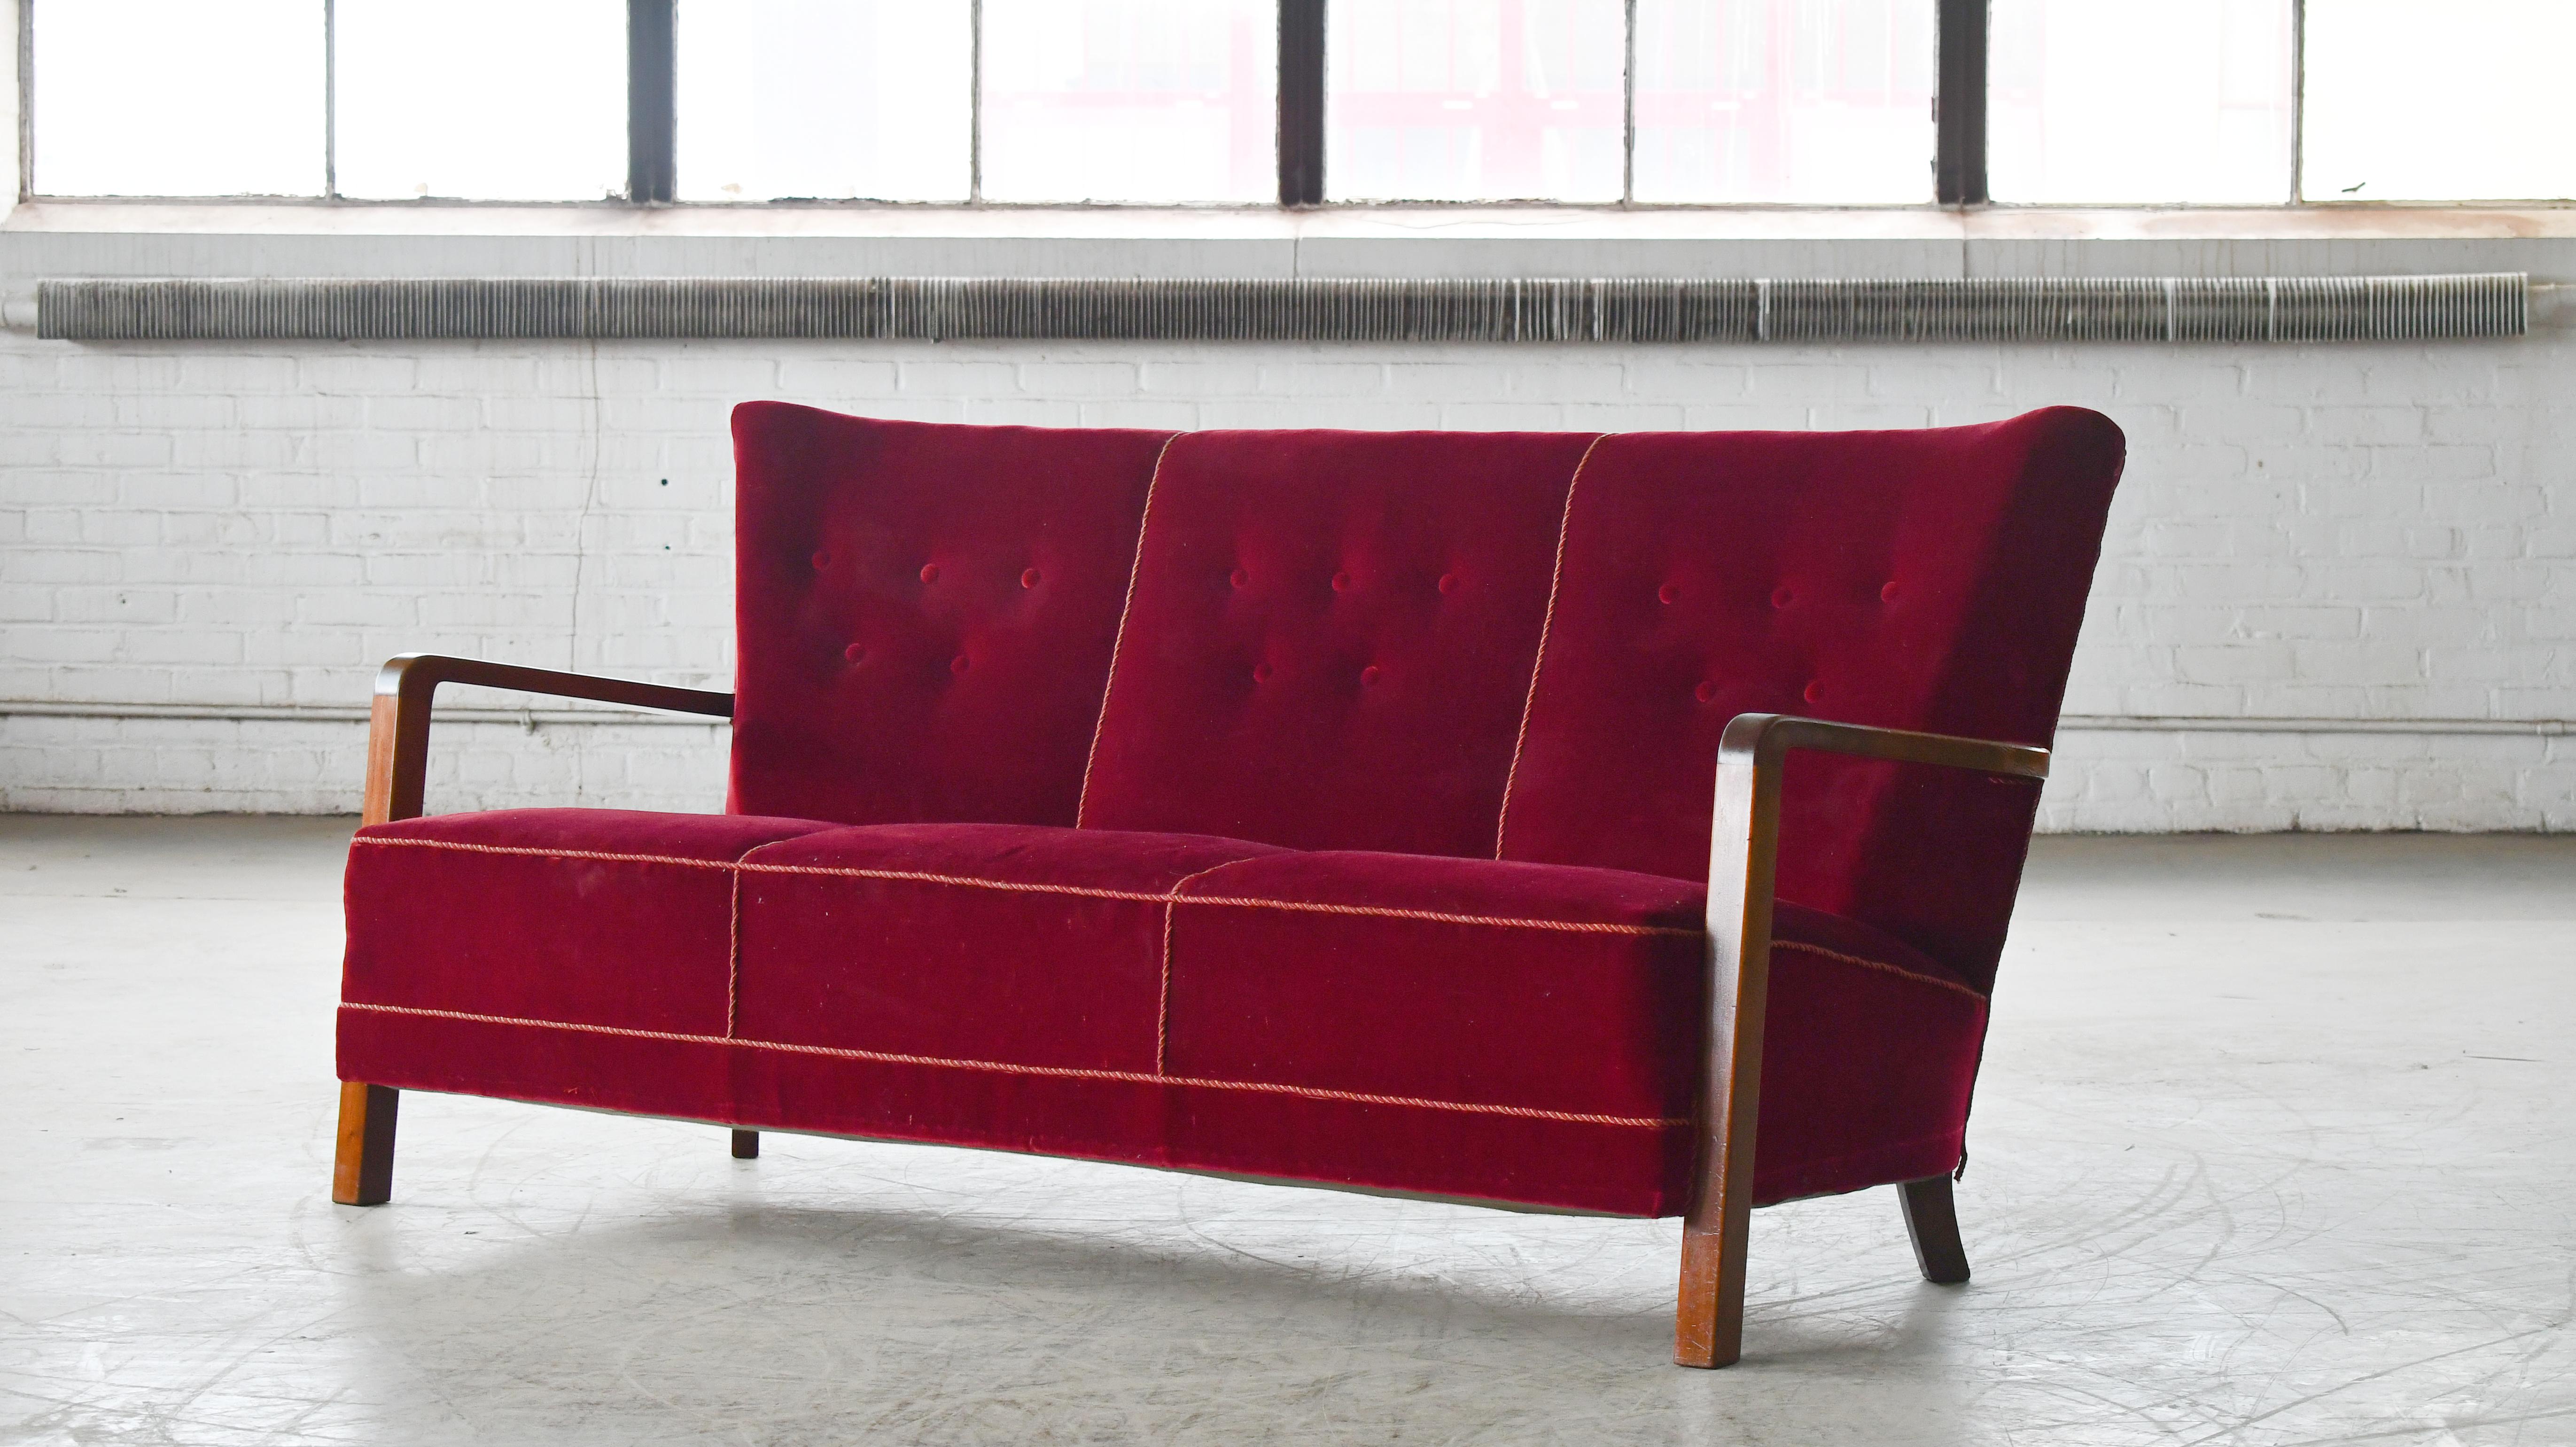 Mid-20th Century Danish Art Deco or Early Midcentury Sofa with Open Wooden Armrests, 1930's For Sale